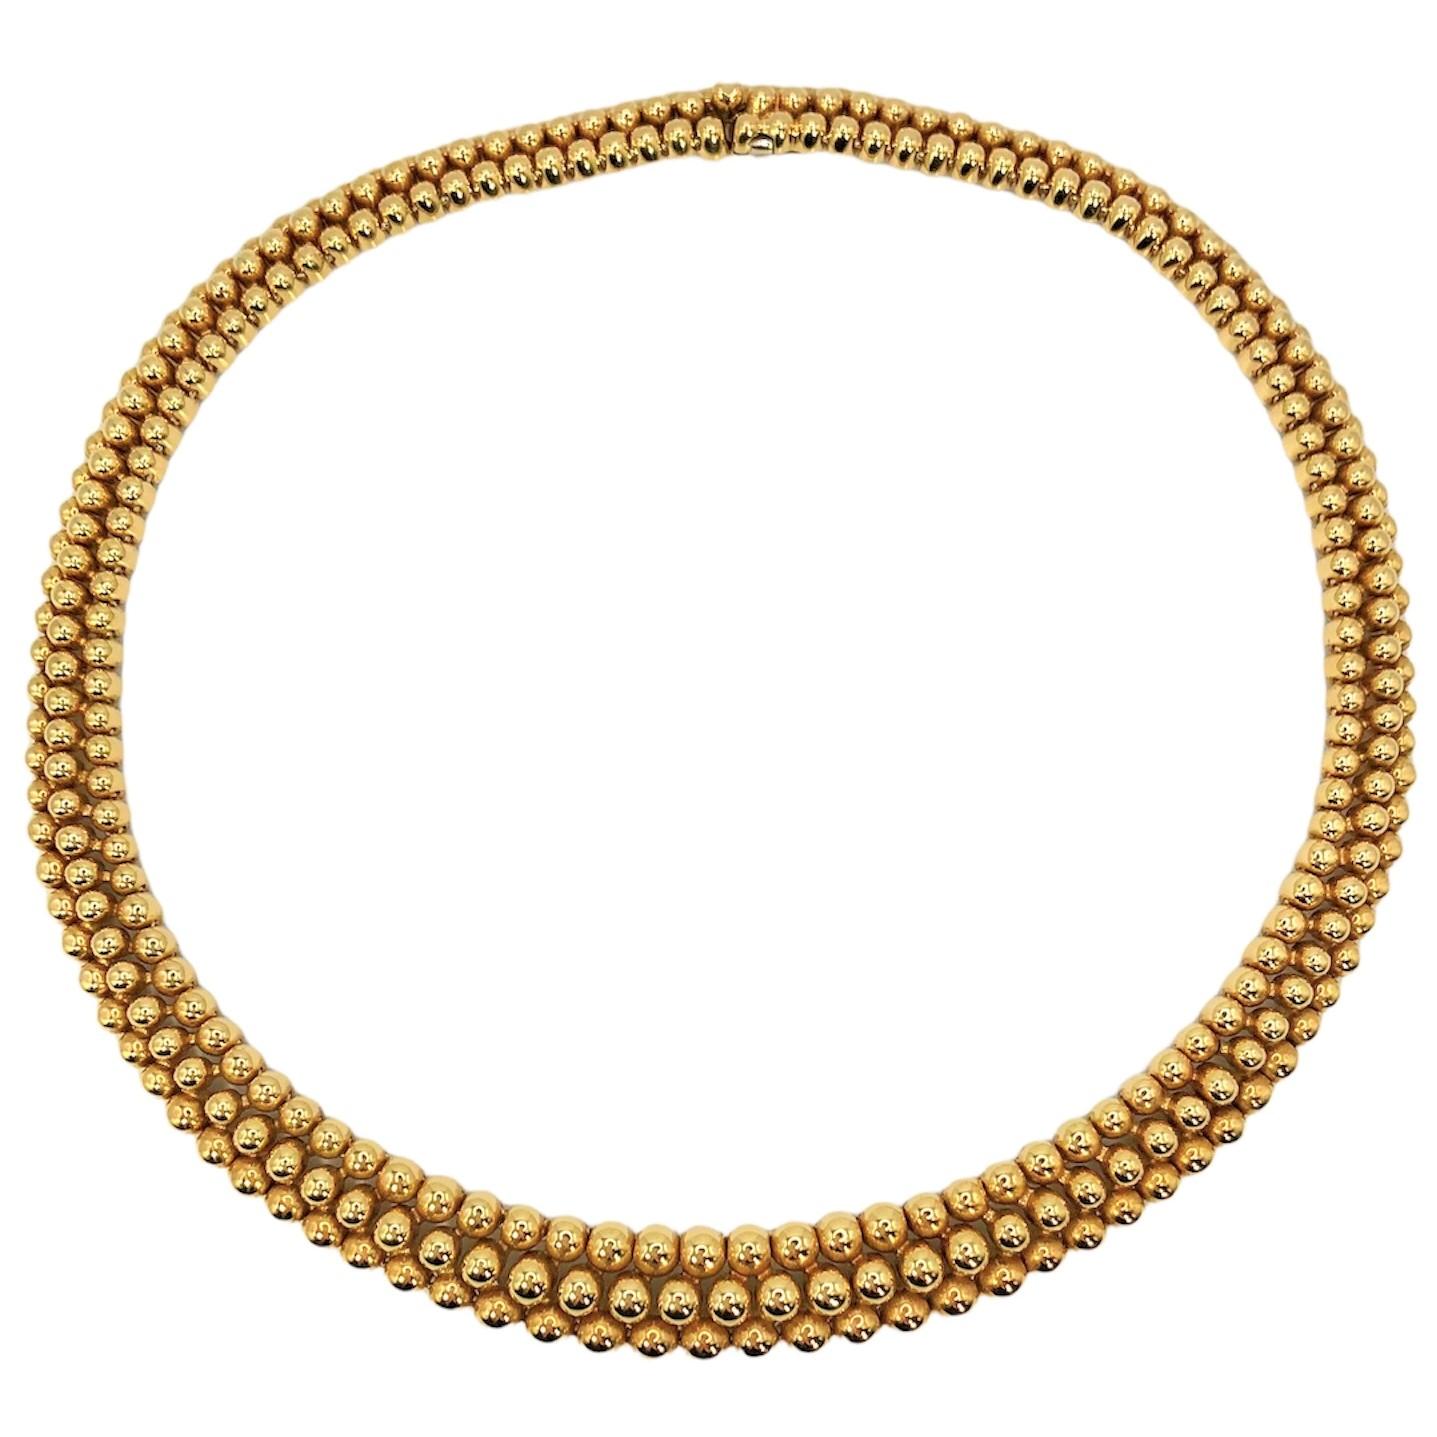 This lovely and tailored choker necklace by Boucheron was crafted and released late in the 20th century and is wonderful in it's simplicity. It is designed as three rows of graduating polished gold beads terminating in a hidden clasp. Measures 14